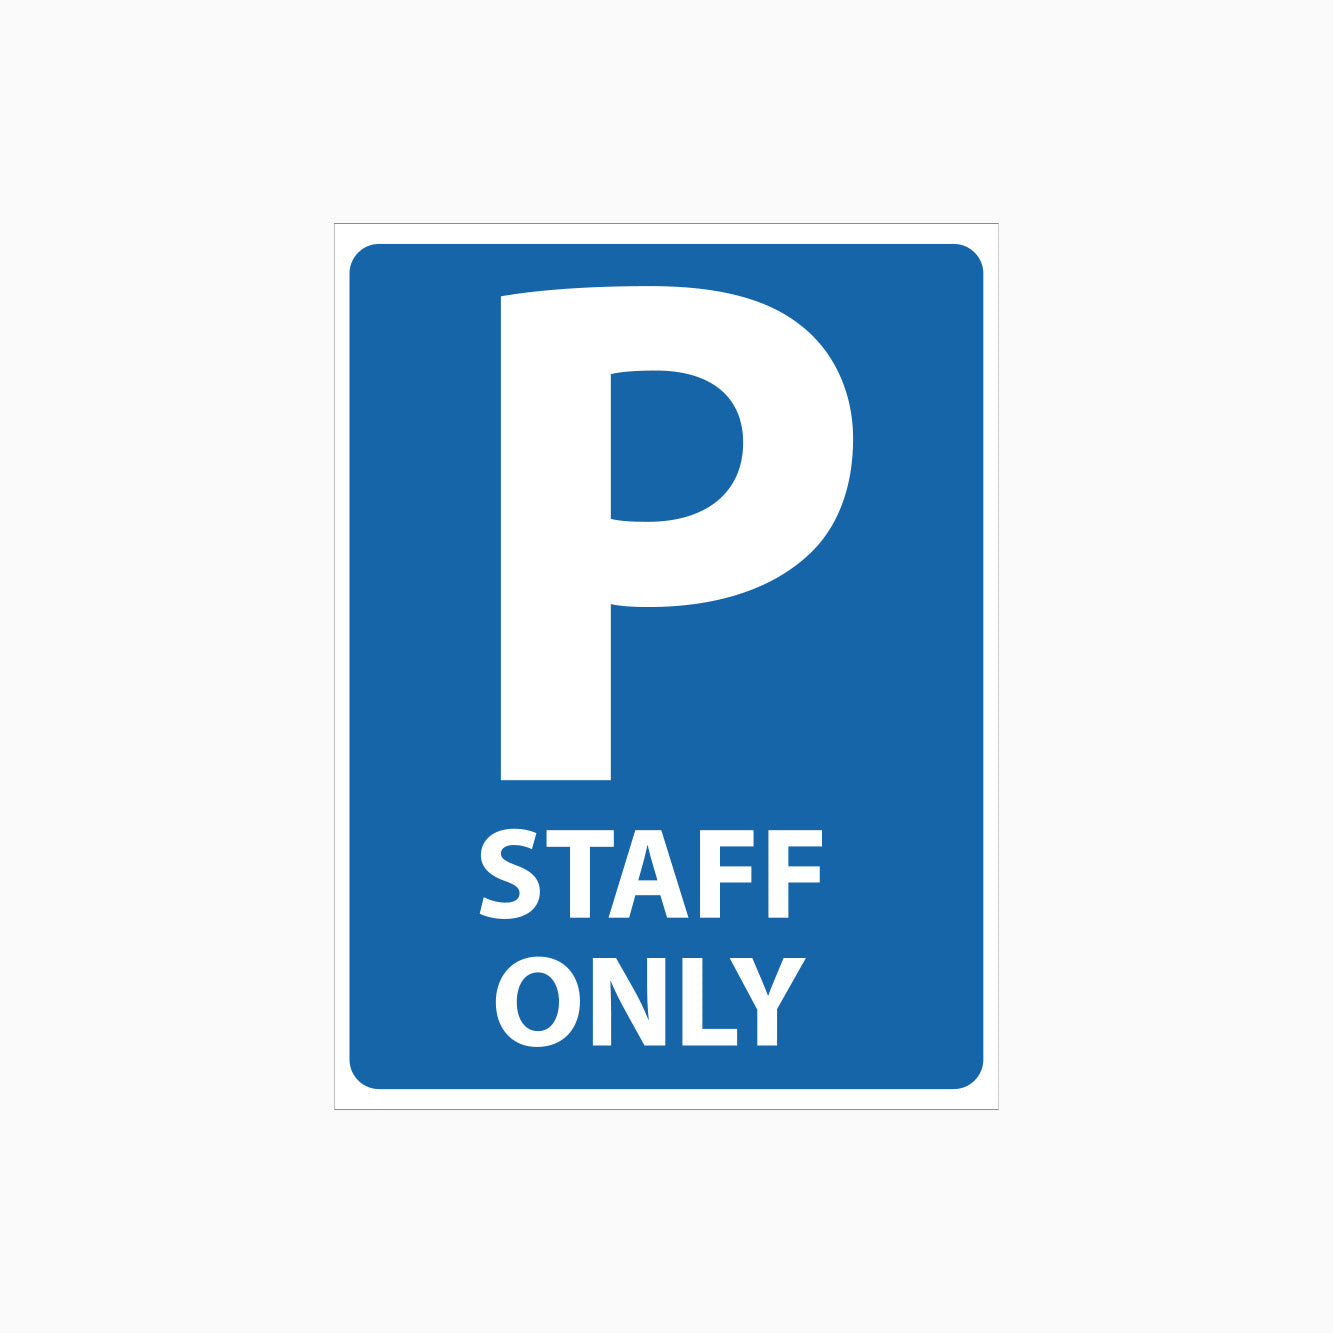 PARKING STAFF ONLY SIGN - PARKING AND NO PARKING SIGNS FROM GET SIGNS